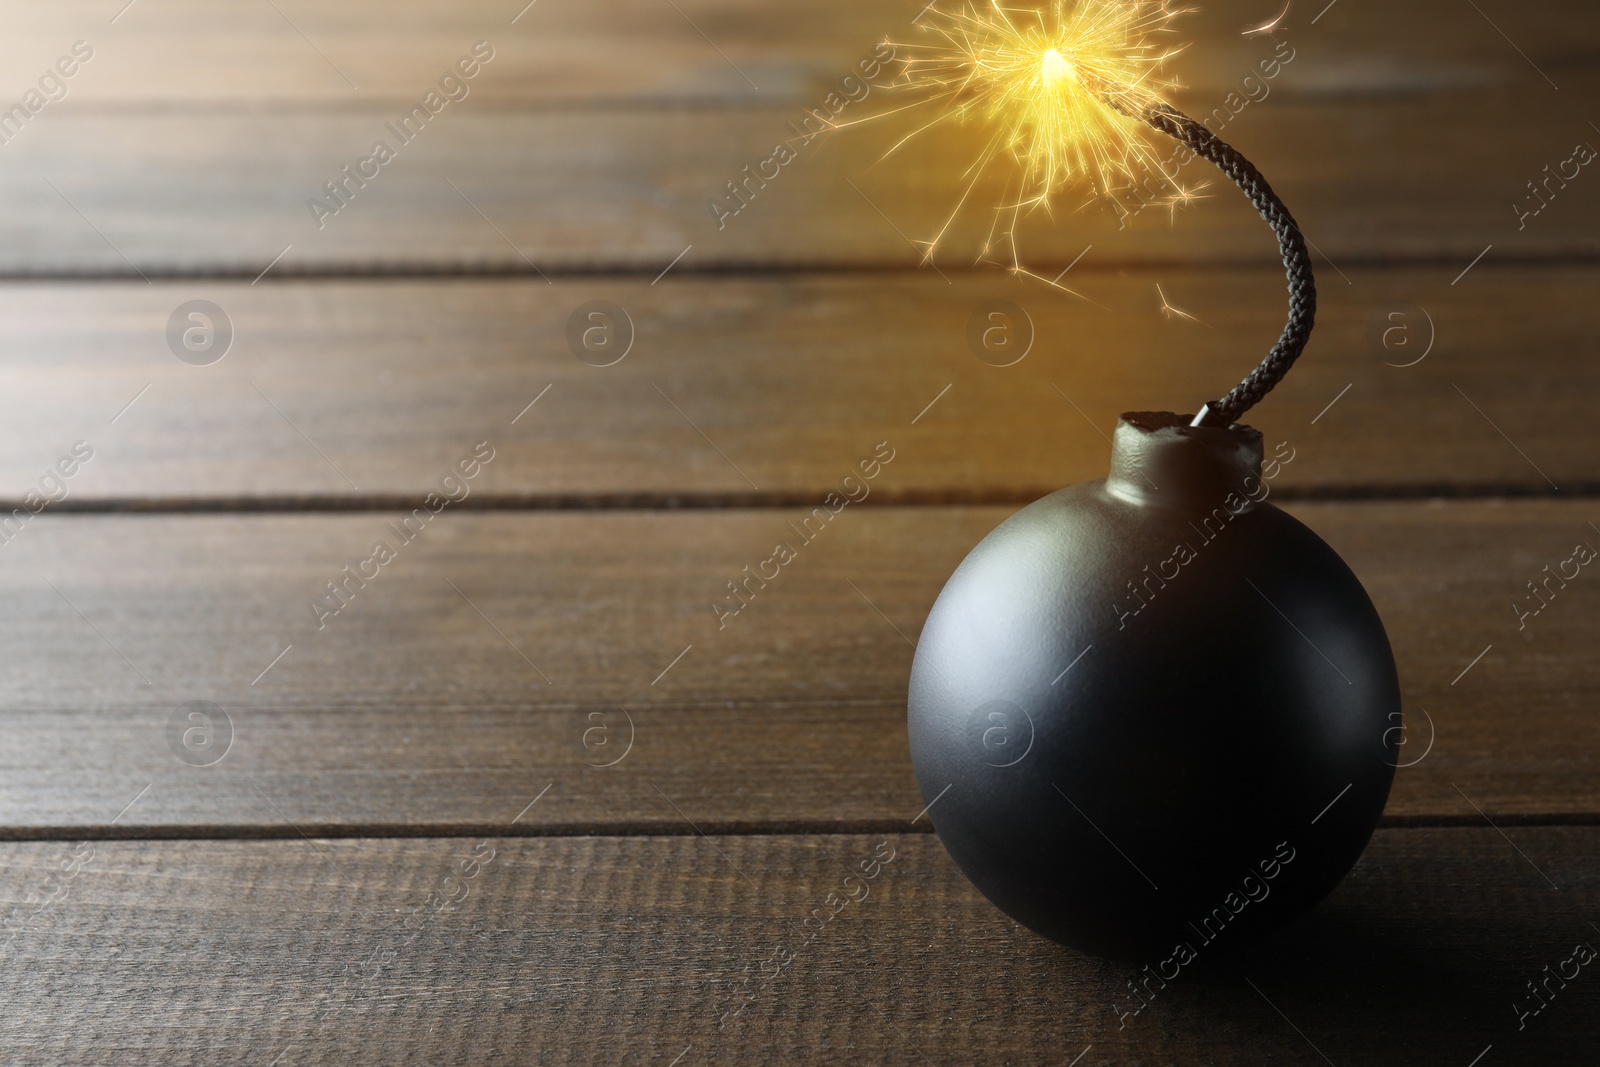 Image of Old fashioned black bomb with lit fuse on wooden table, space for text